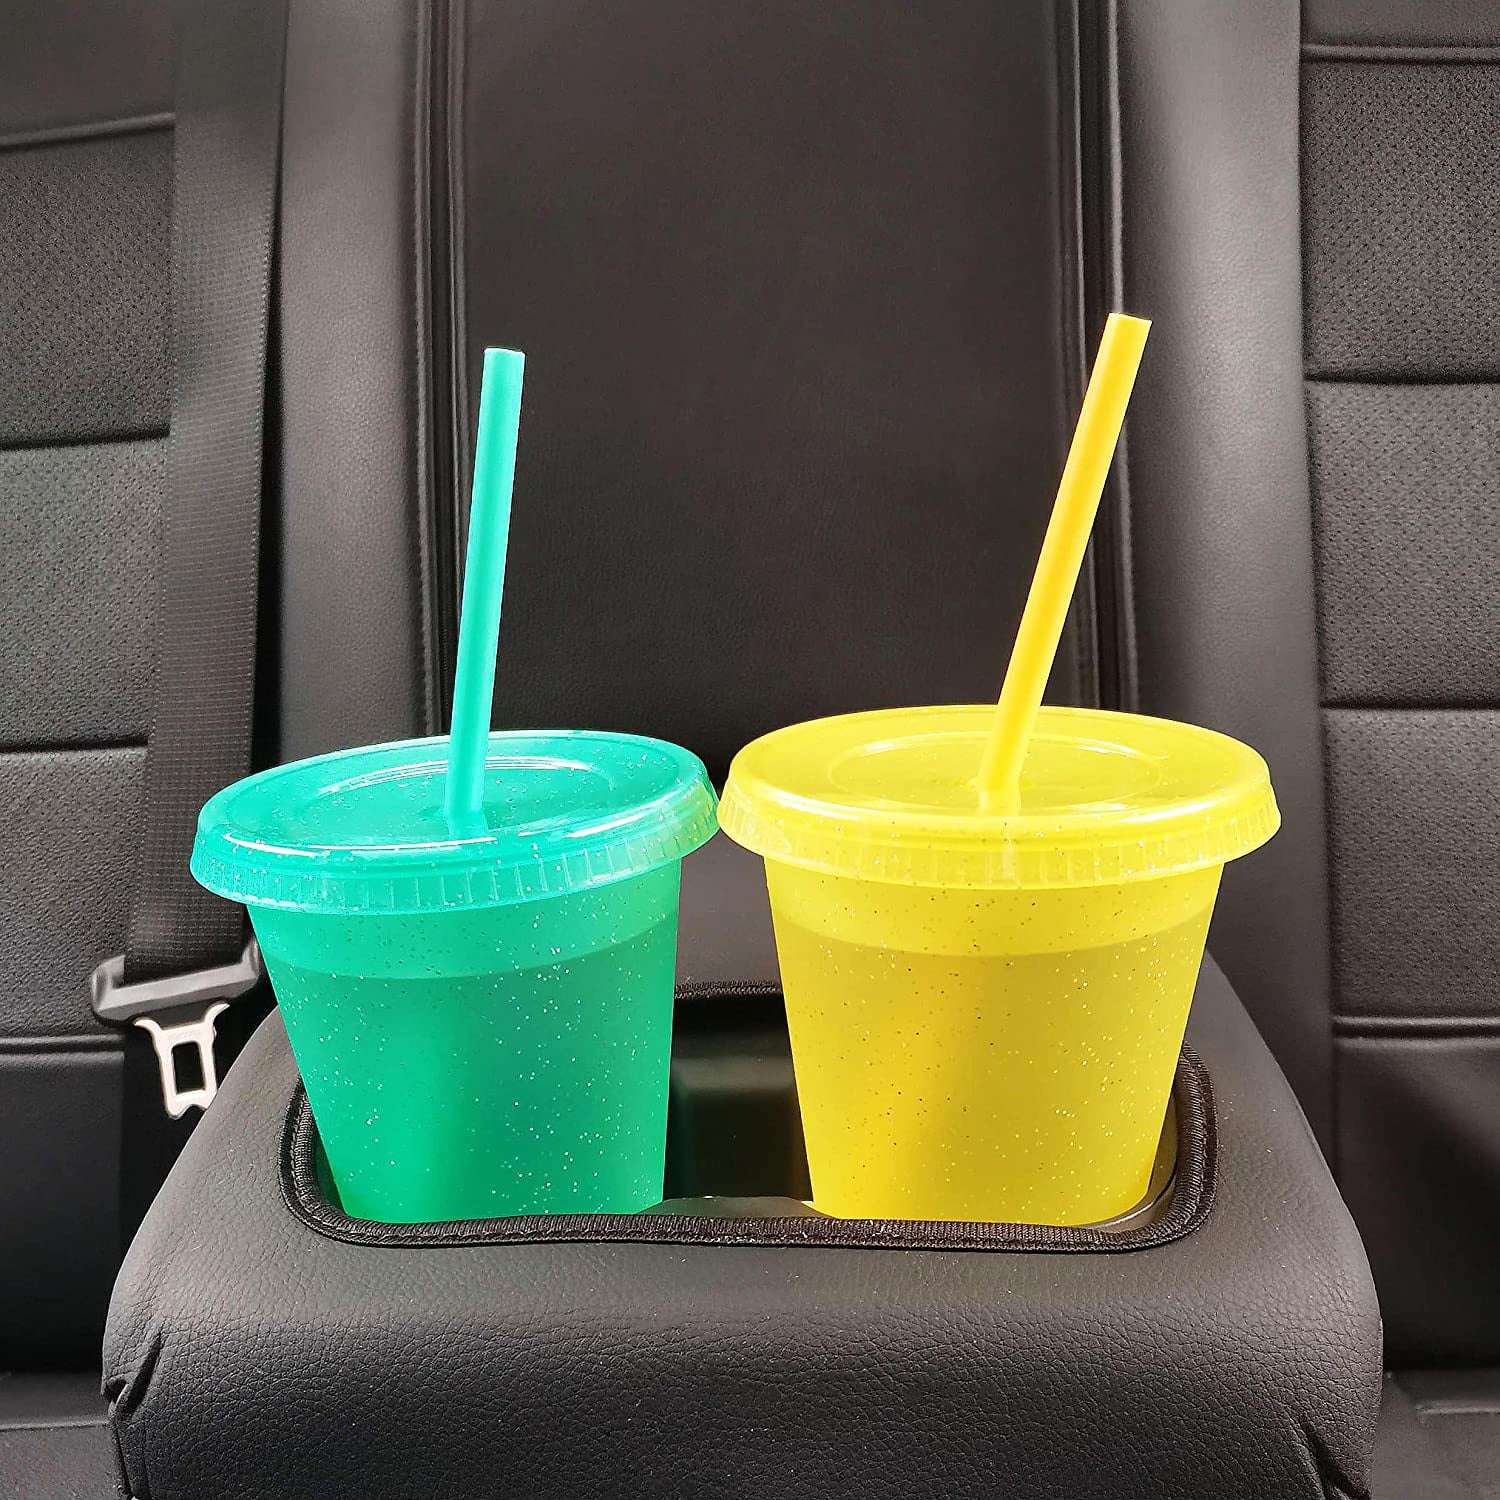 Meoky Plastic Cute Cold Cups with Lids and Straws Bulk for Iced Coffee - 6  Pack 24 oz Color Changing…See more Meoky Plastic Cute Cold Cups with Lids